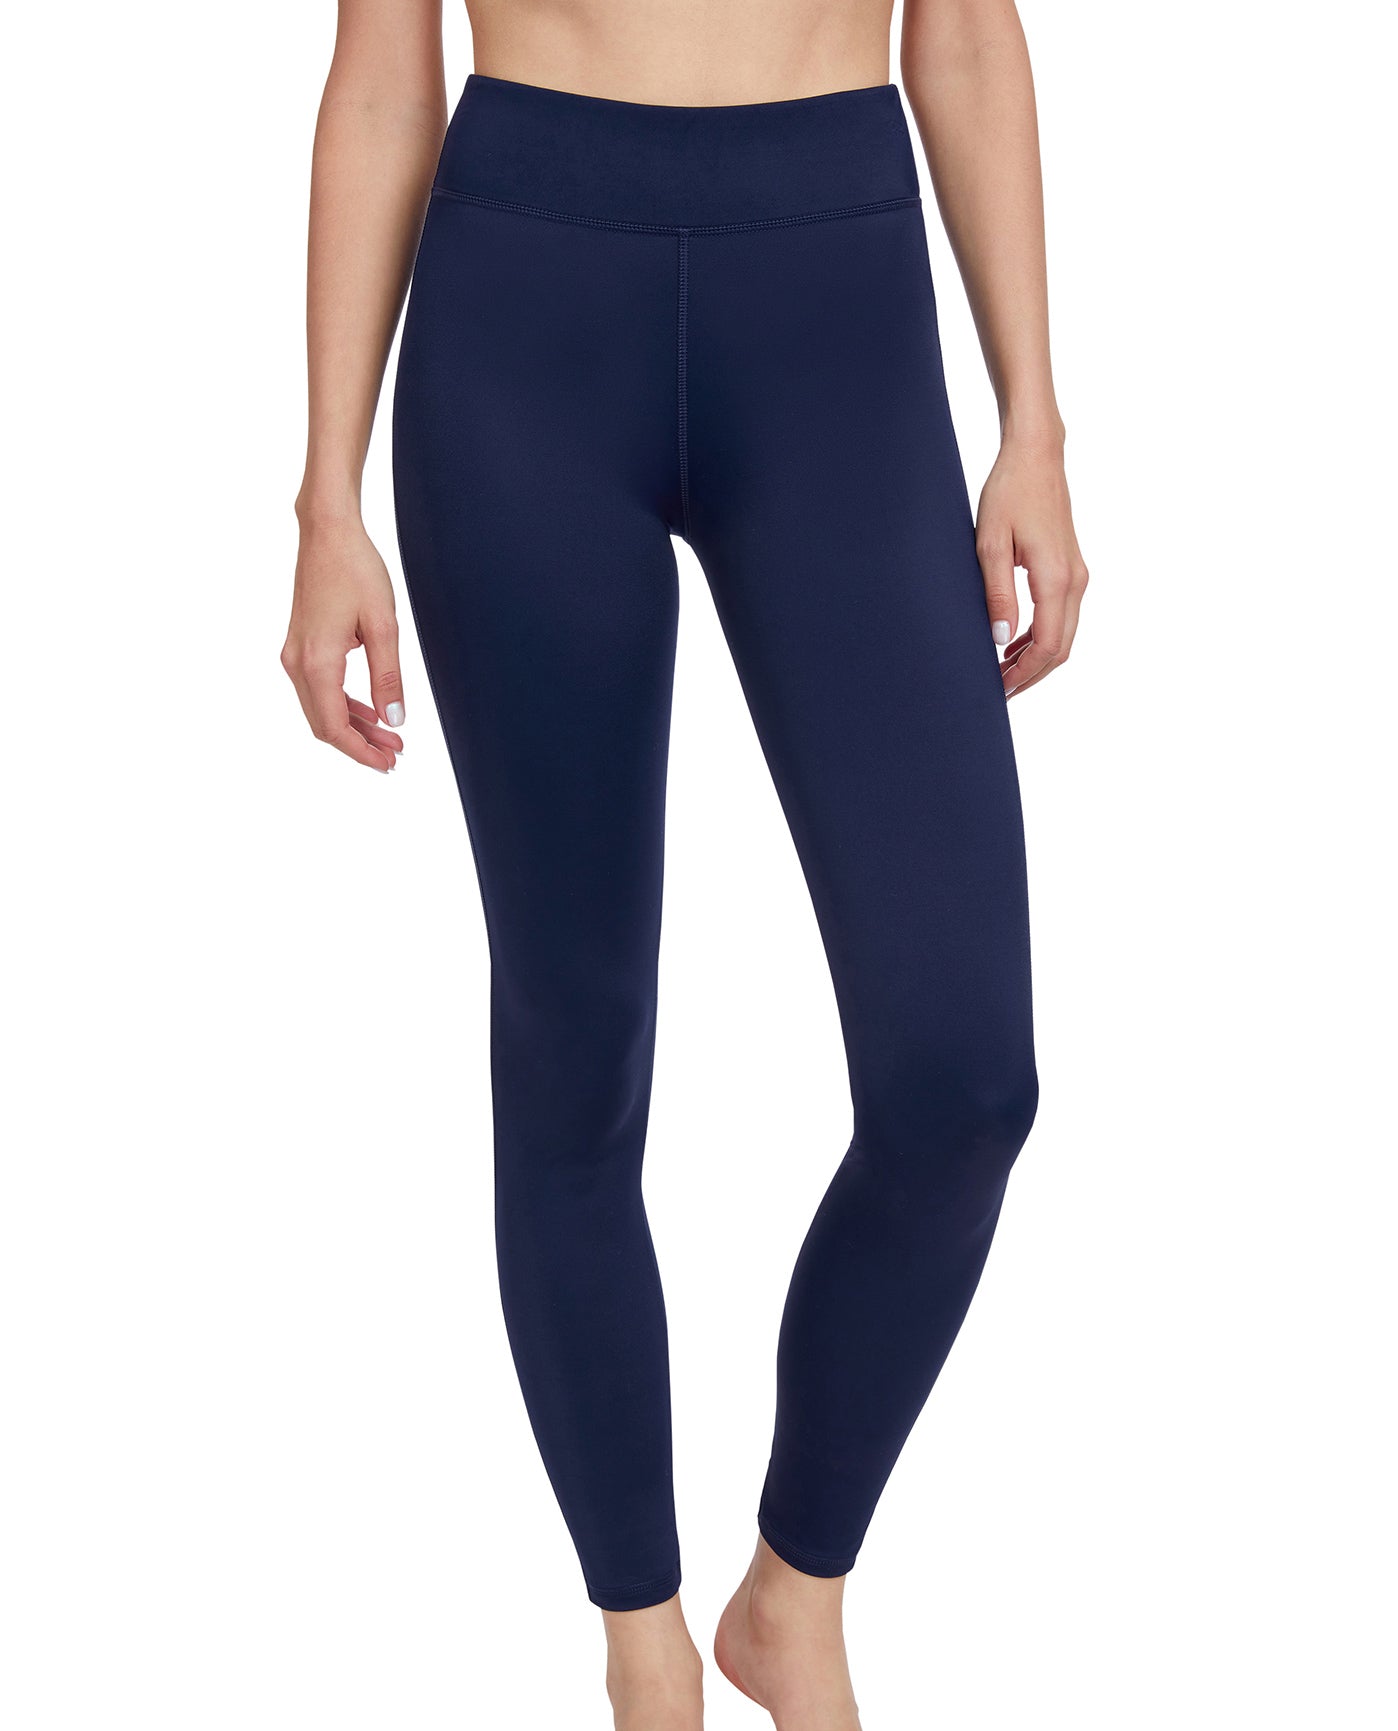 Athletic Leggings By Gottex Size: S